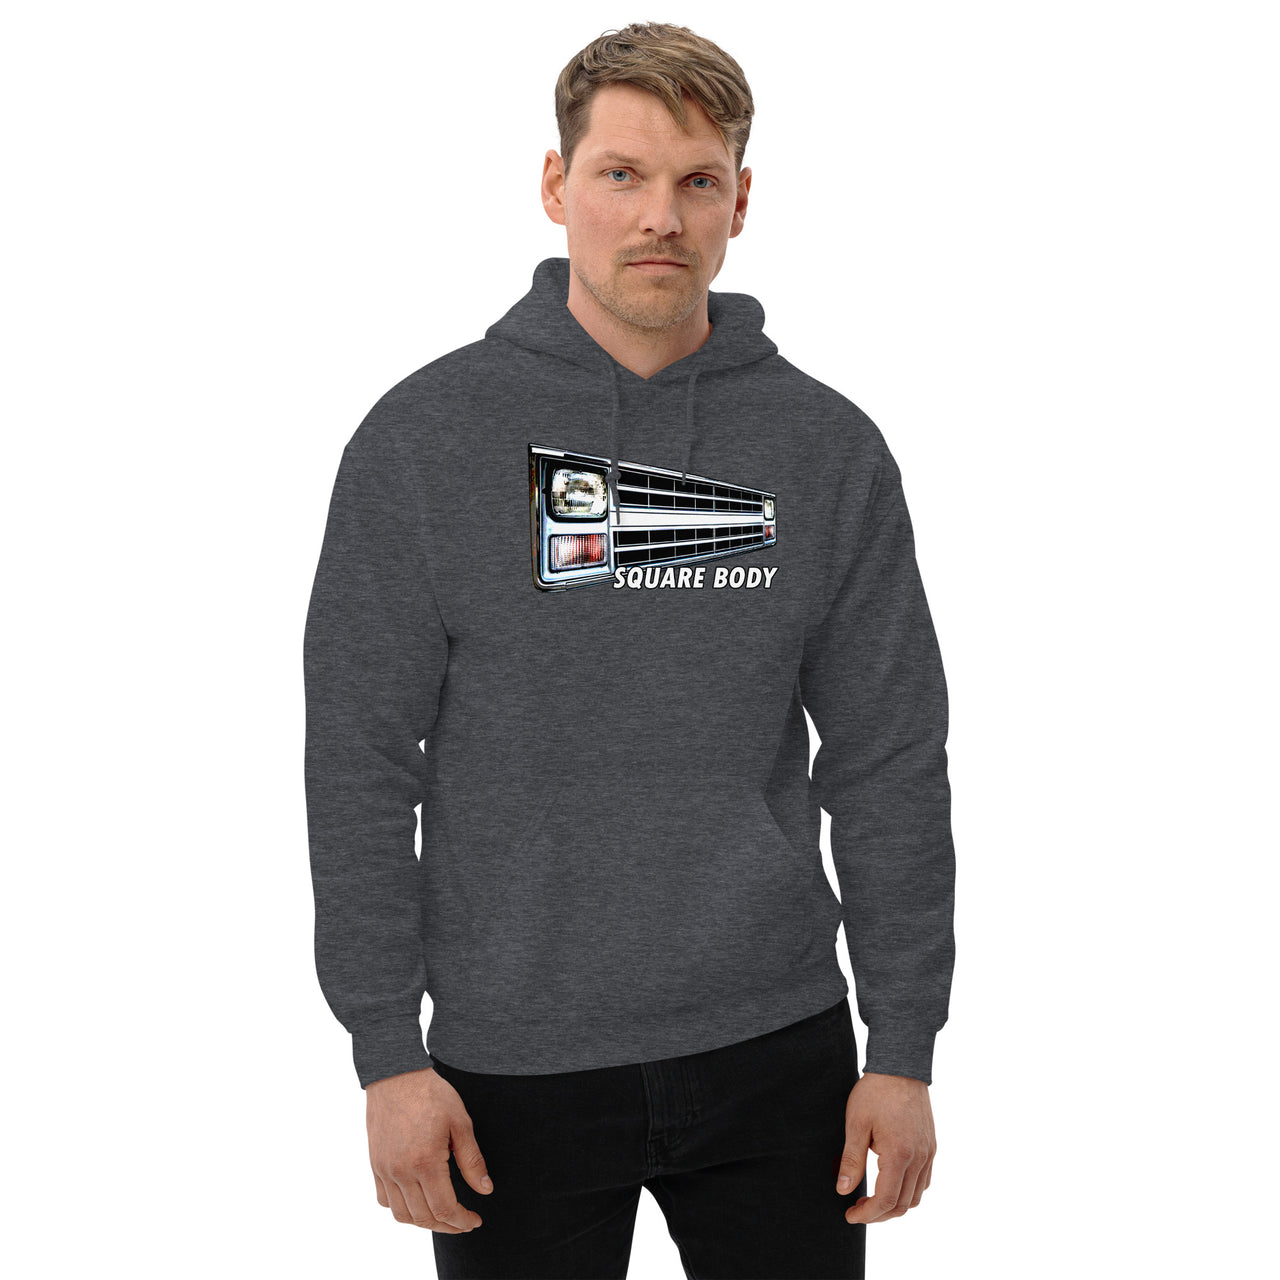 Square Body Truck 80s Angled Grille Hoodie modeled in grey